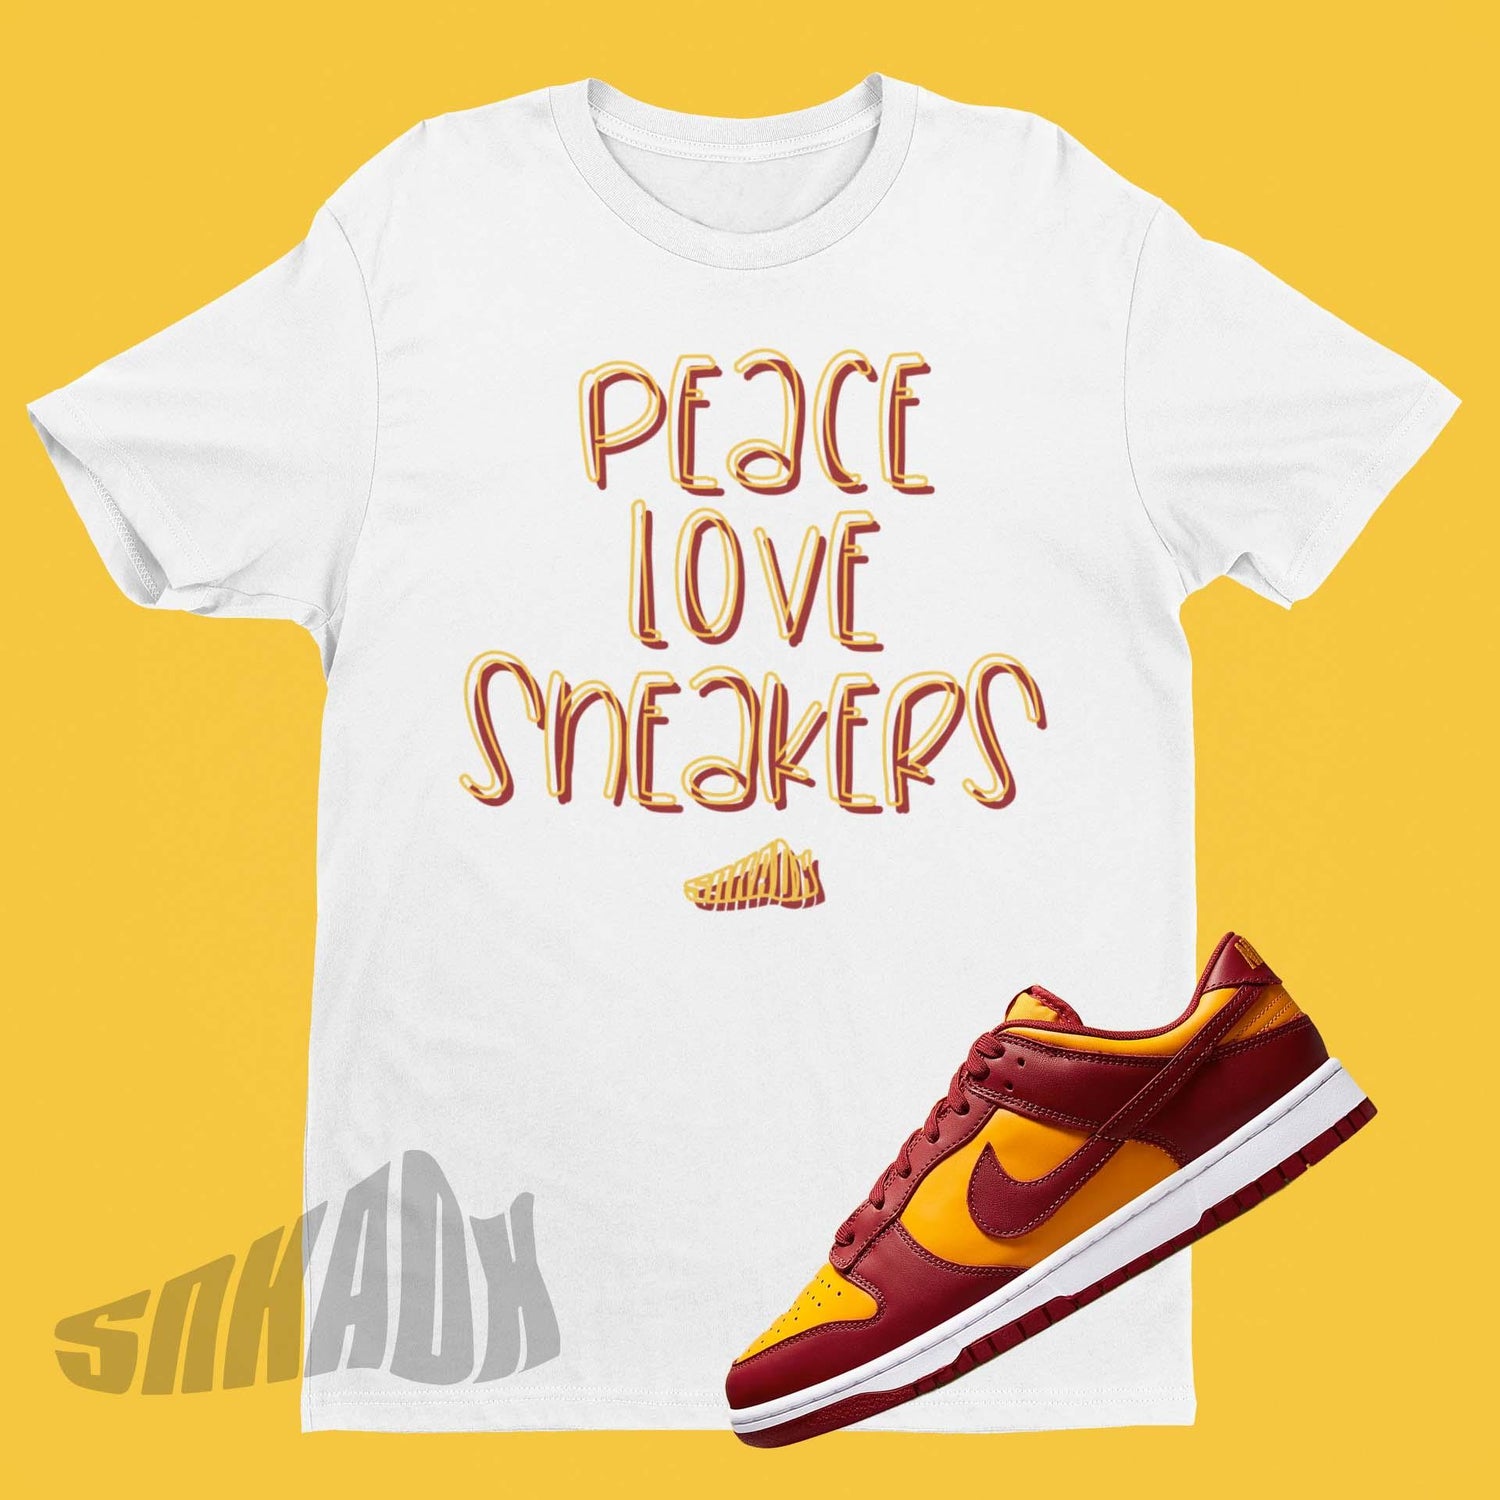 Nike Dunk Midas Gold Matching Shirt With Peace Love Sneakers On Front